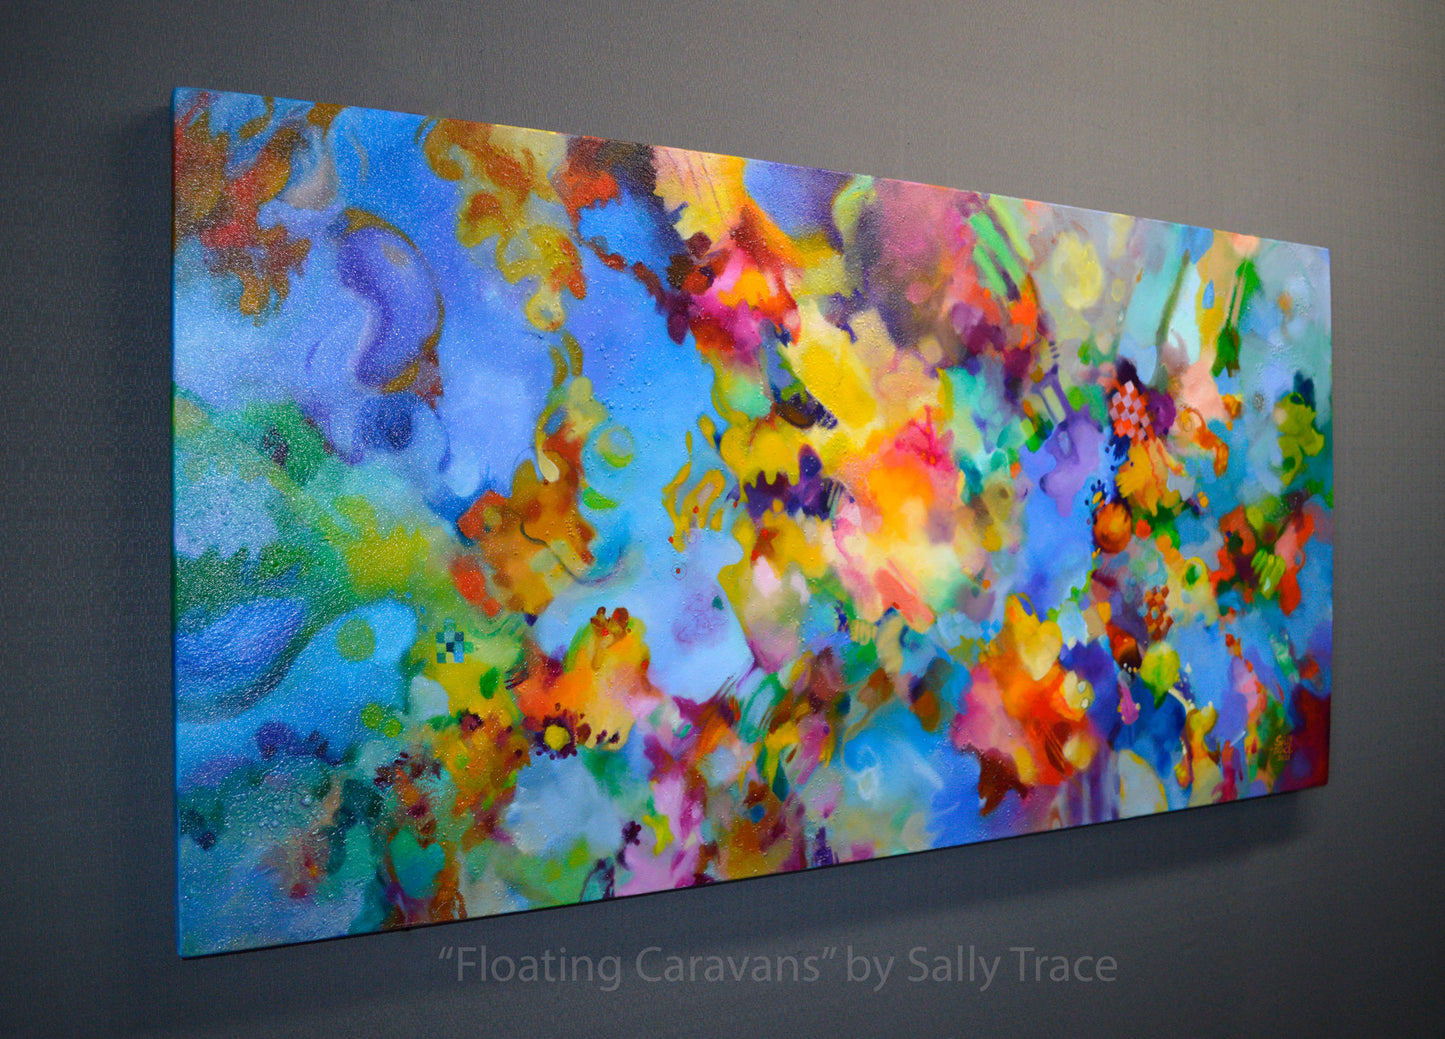 Interior design modern large wall art for living room, Sally Trace acrylic on canvas painting "Floating Caravans",  a free-form expressionist painting, modern contemporary art abstract paintings, original abstract art for sale online. original acrylic paintings for sale, left view